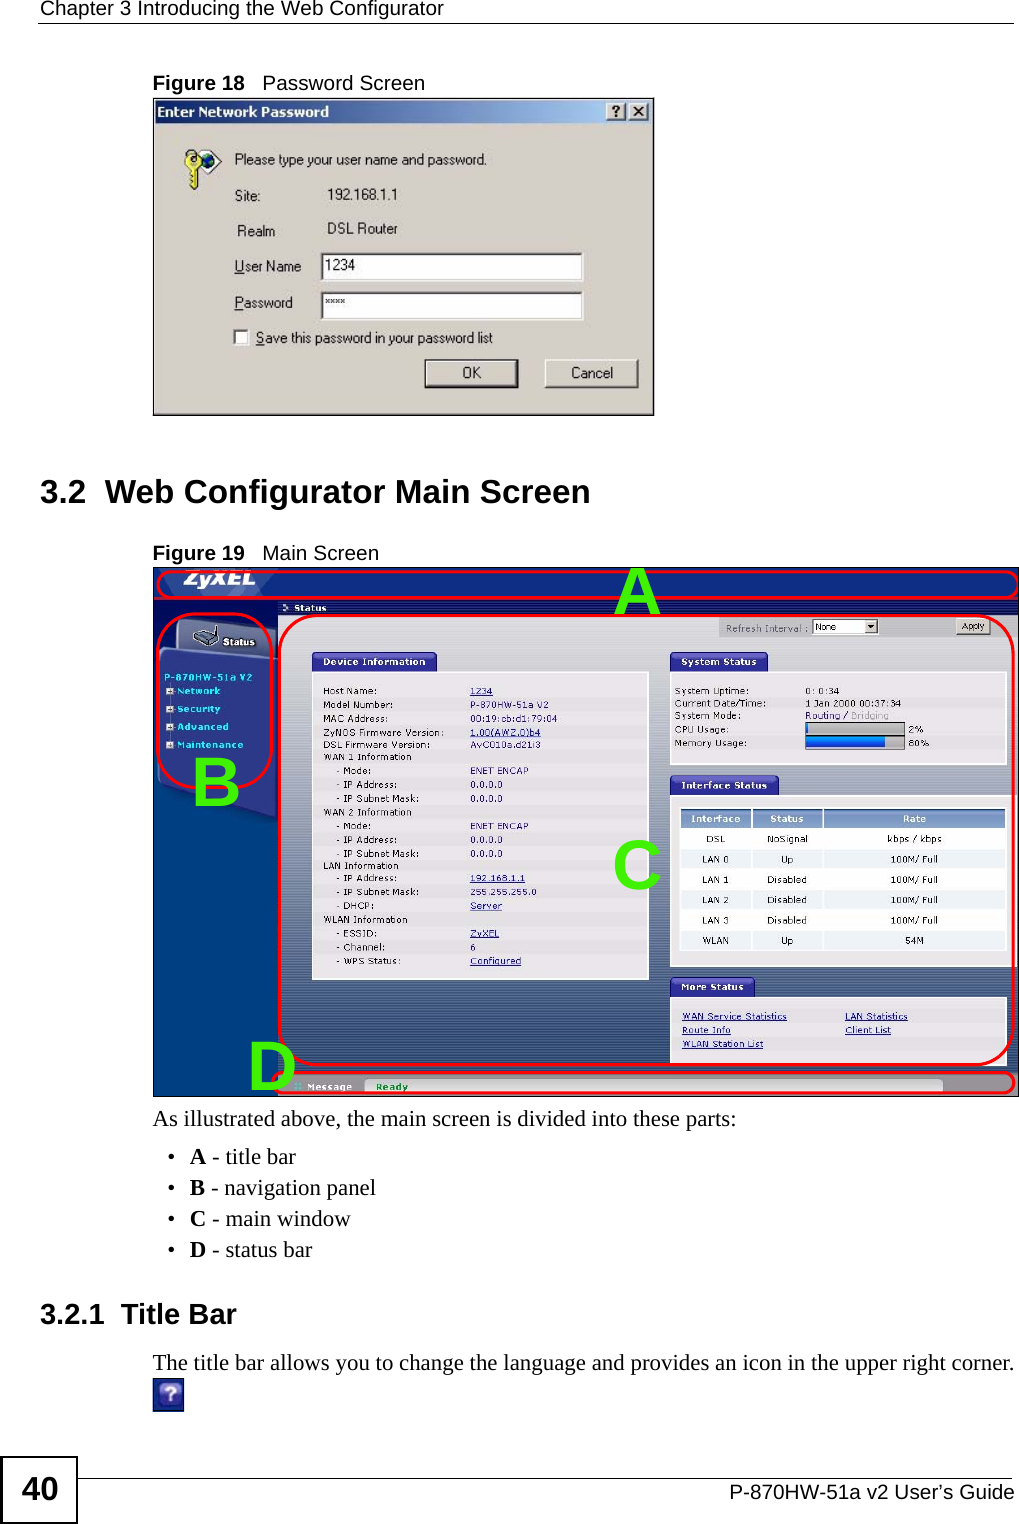 Chapter 3 Introducing the Web ConfiguratorP-870HW-51a v2 User’s Guide40Figure 18   Password Screen3.2  Web Configurator Main ScreenFigure 19   Main ScreenAs illustrated above, the main screen is divided into these parts:•A - title bar•B - navigation panel•C - main window•D - status bar3.2.1  Title BarThe title bar allows you to change the language and provides an icon in the upper right corner.ABCD